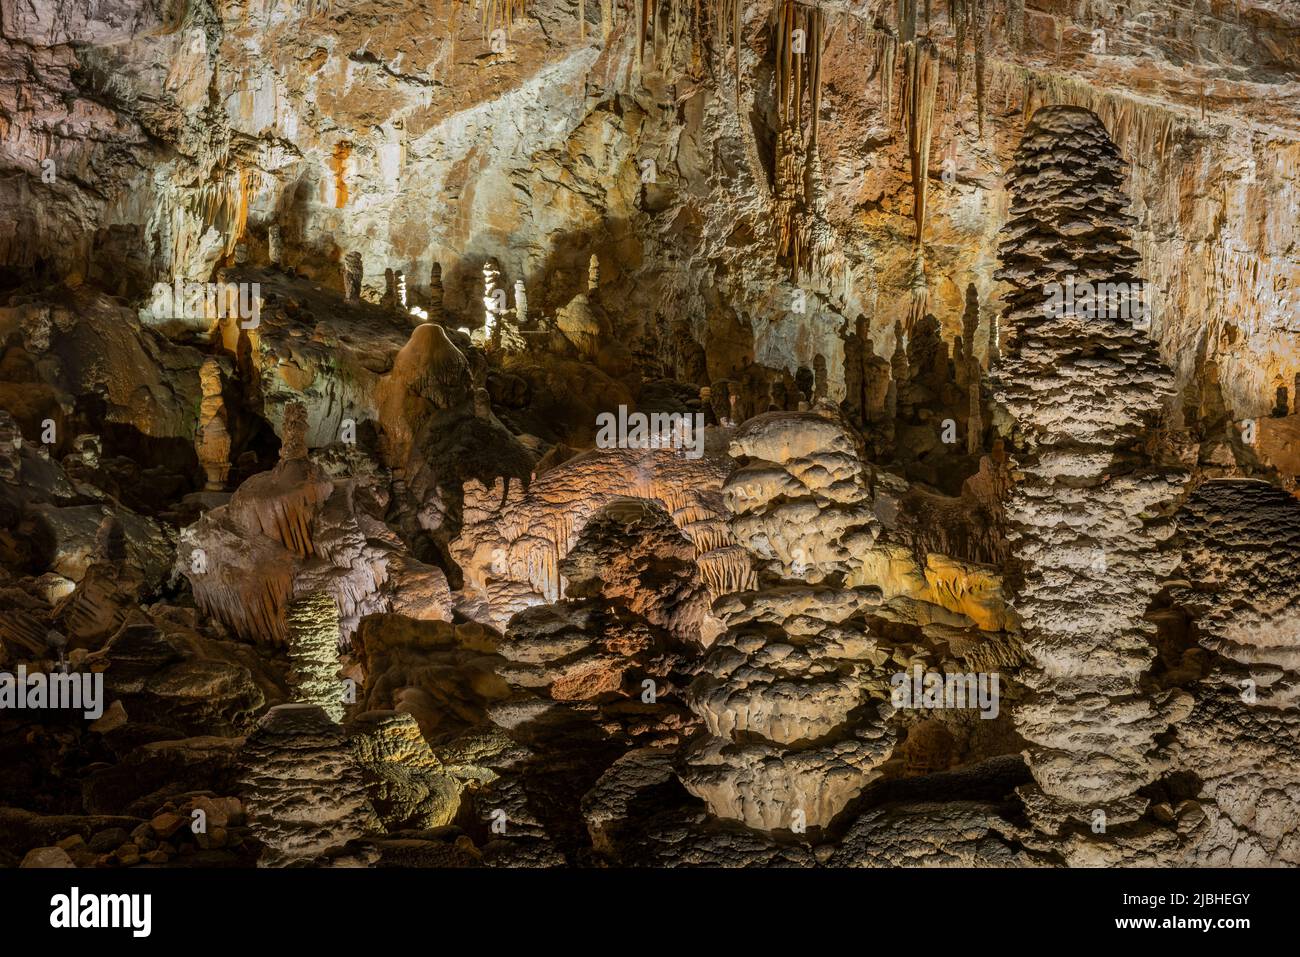 Stalagmites inside the Grotta Gigante is a giant cave on the Italian side of the Trieste Karst (Carso). Stock Photo